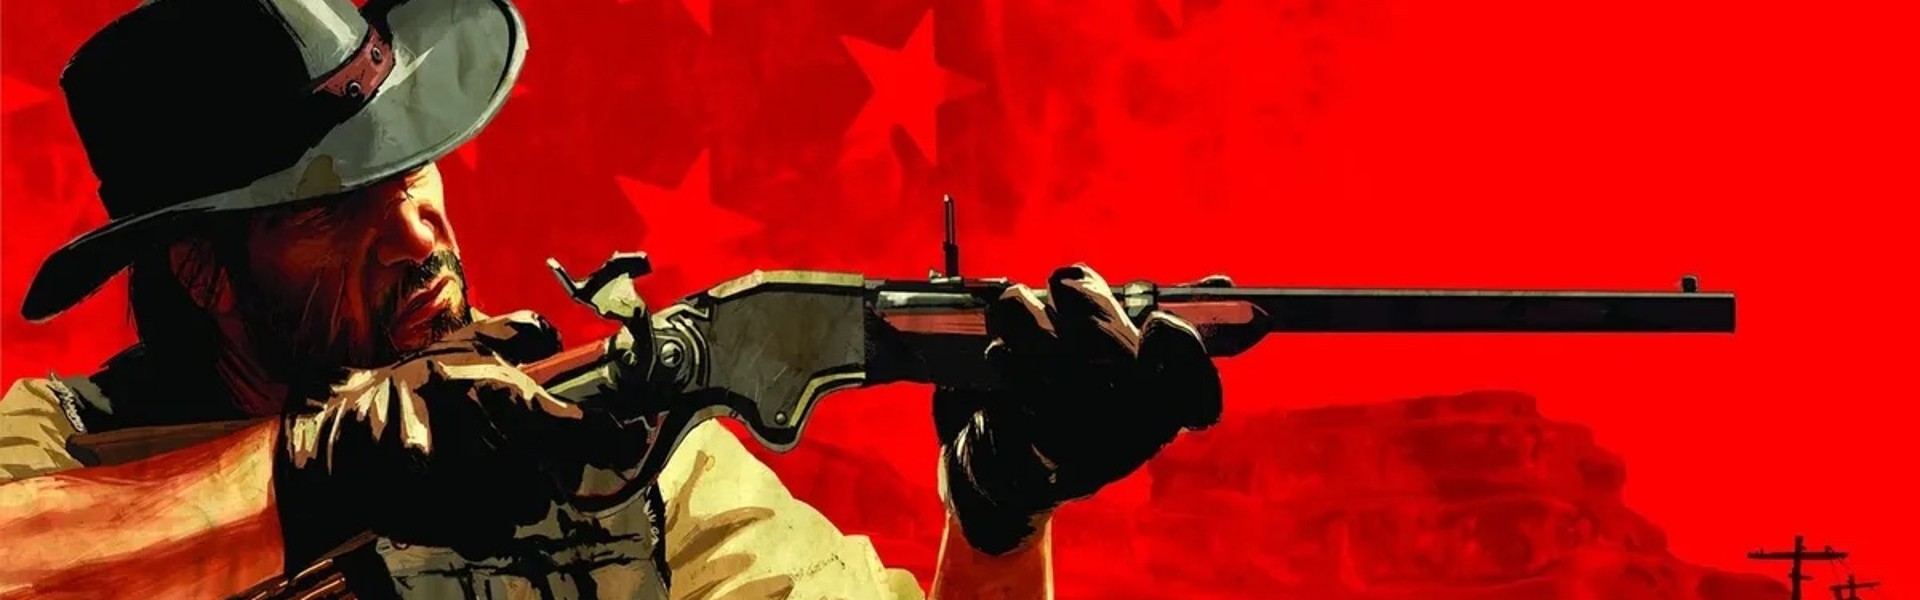 “Red Dead Redemption” is finally on the Nintendo console! However, there’s one catch